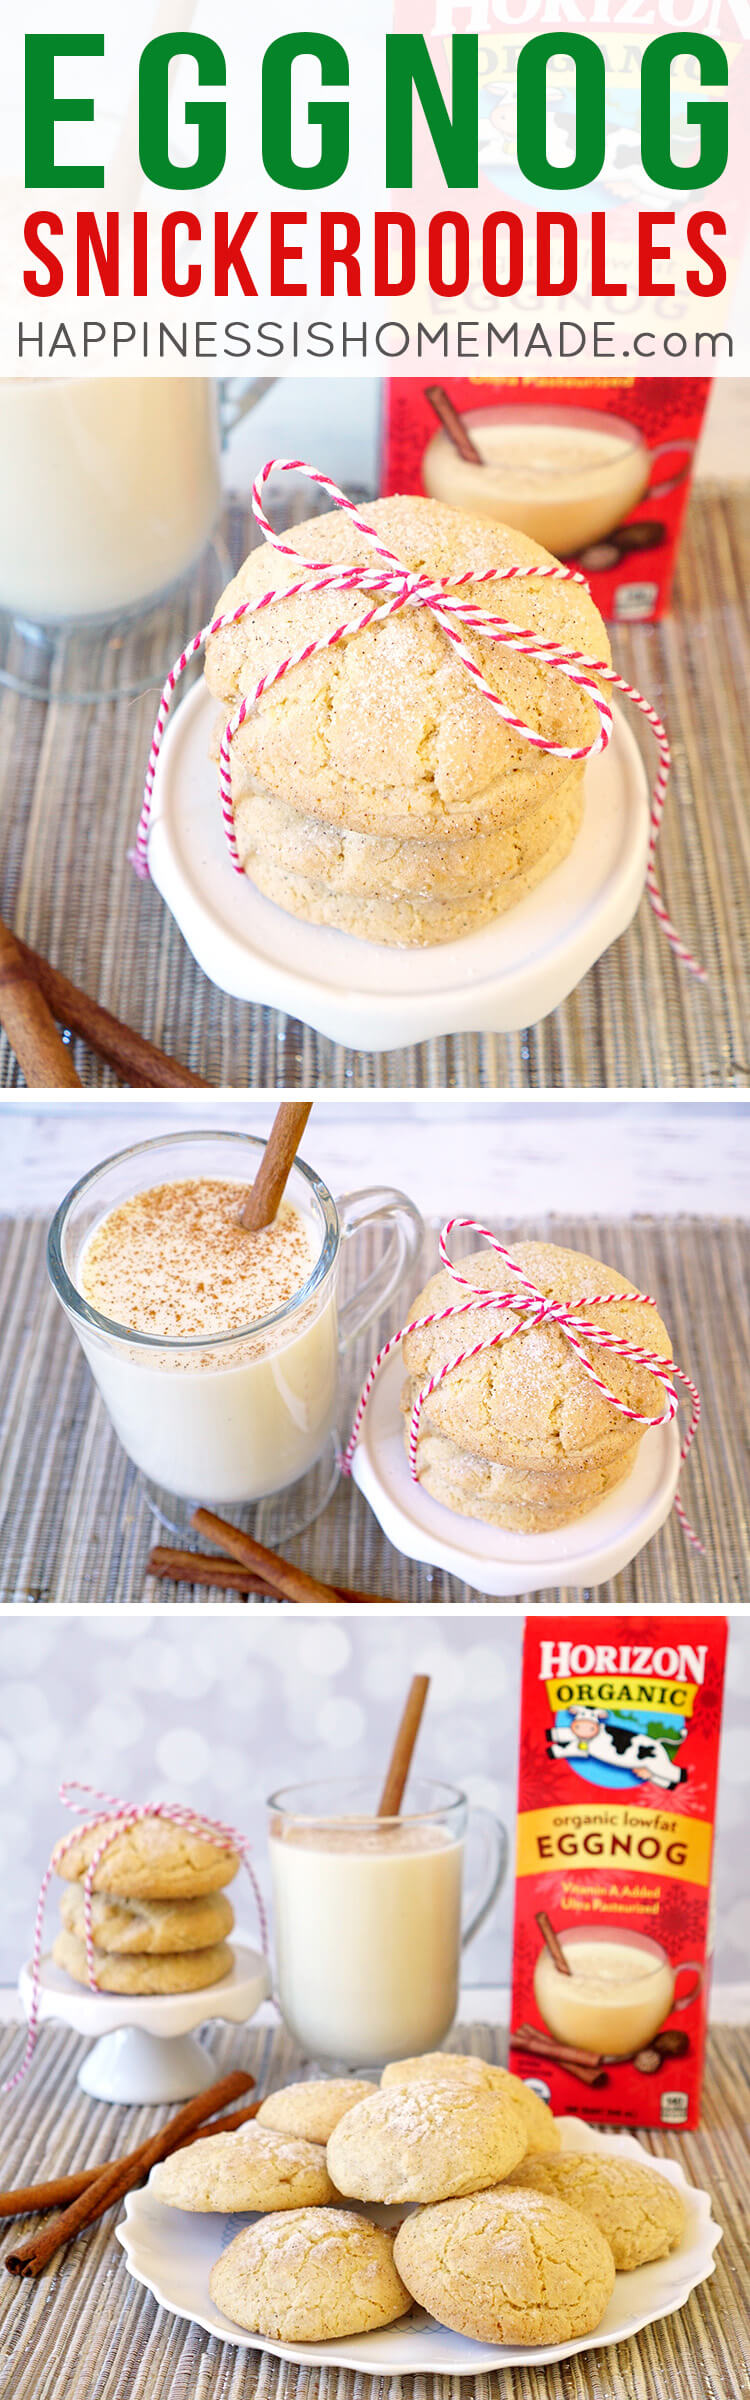 tall glass of eggnog and snickerdoodles with wrapping